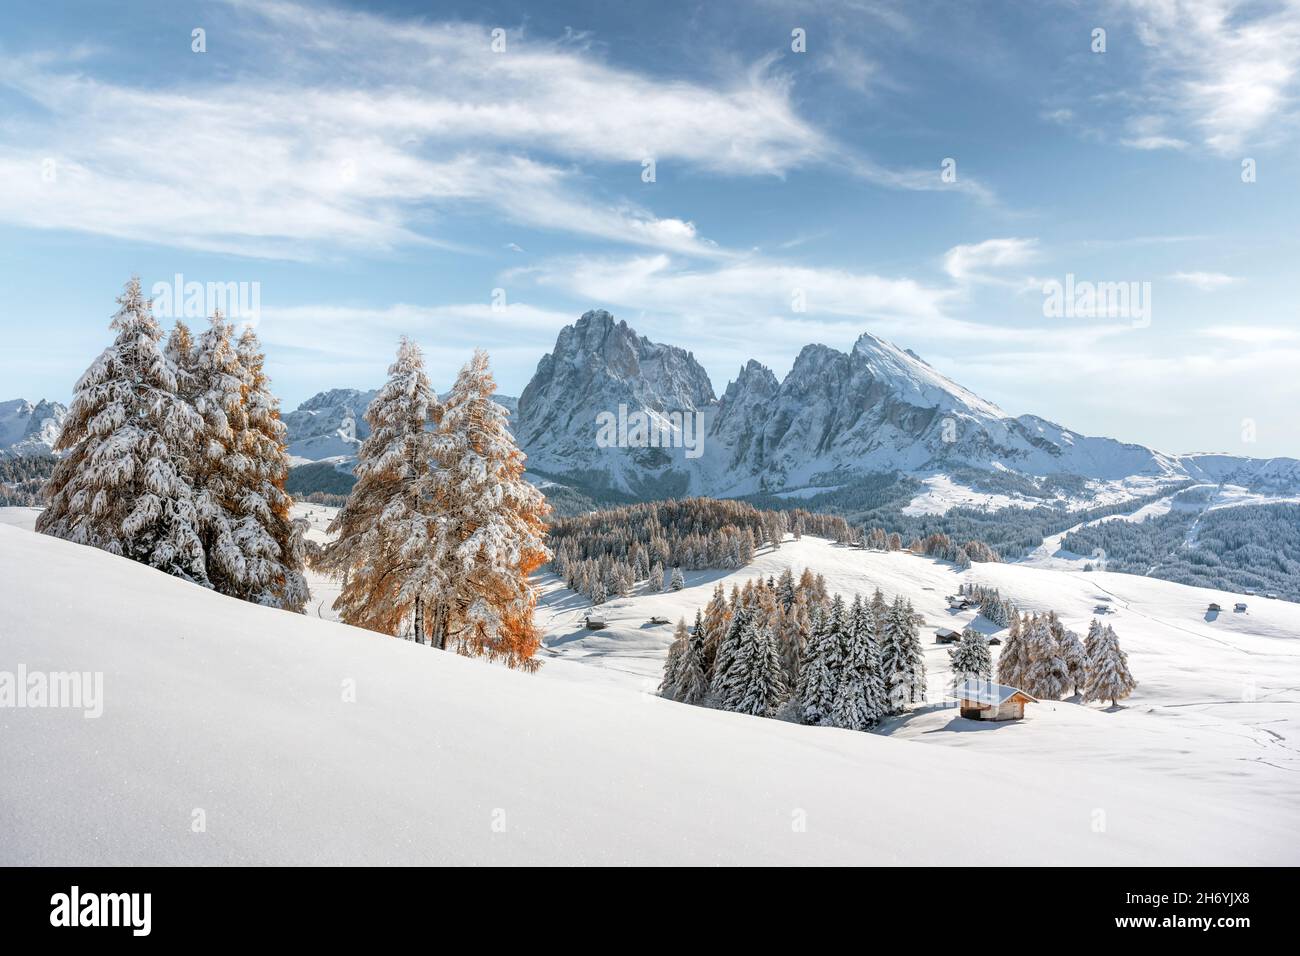 Picturesque landscape with small wooden house, cottage or log cabins on meadow Alpe di Siusi, Seiser Alm, Dolomites, Italy. Snowy hills with orange larch and Sassolungo and Langkofel mountains group Stock Photo